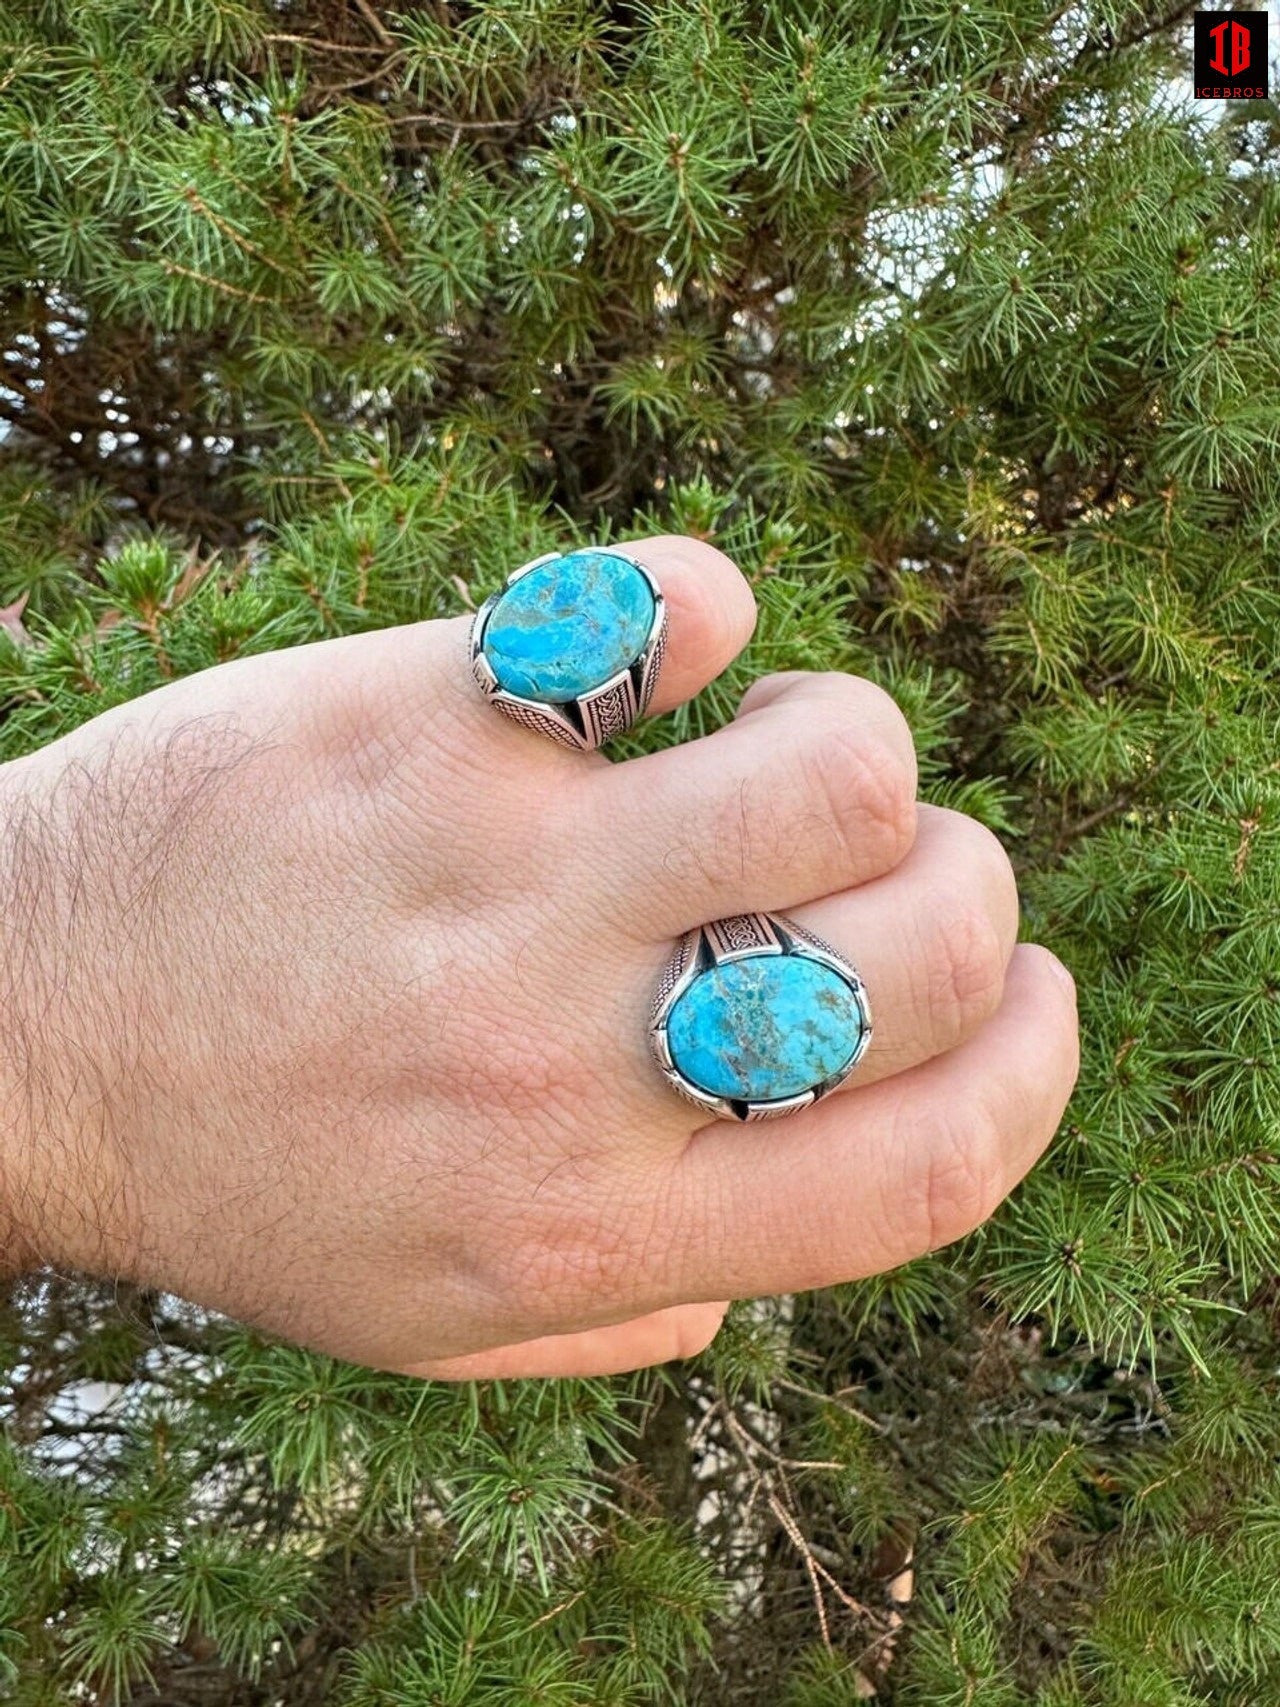 A hand holding two turquoise rings, showcasing their vibrant color and elegant design.